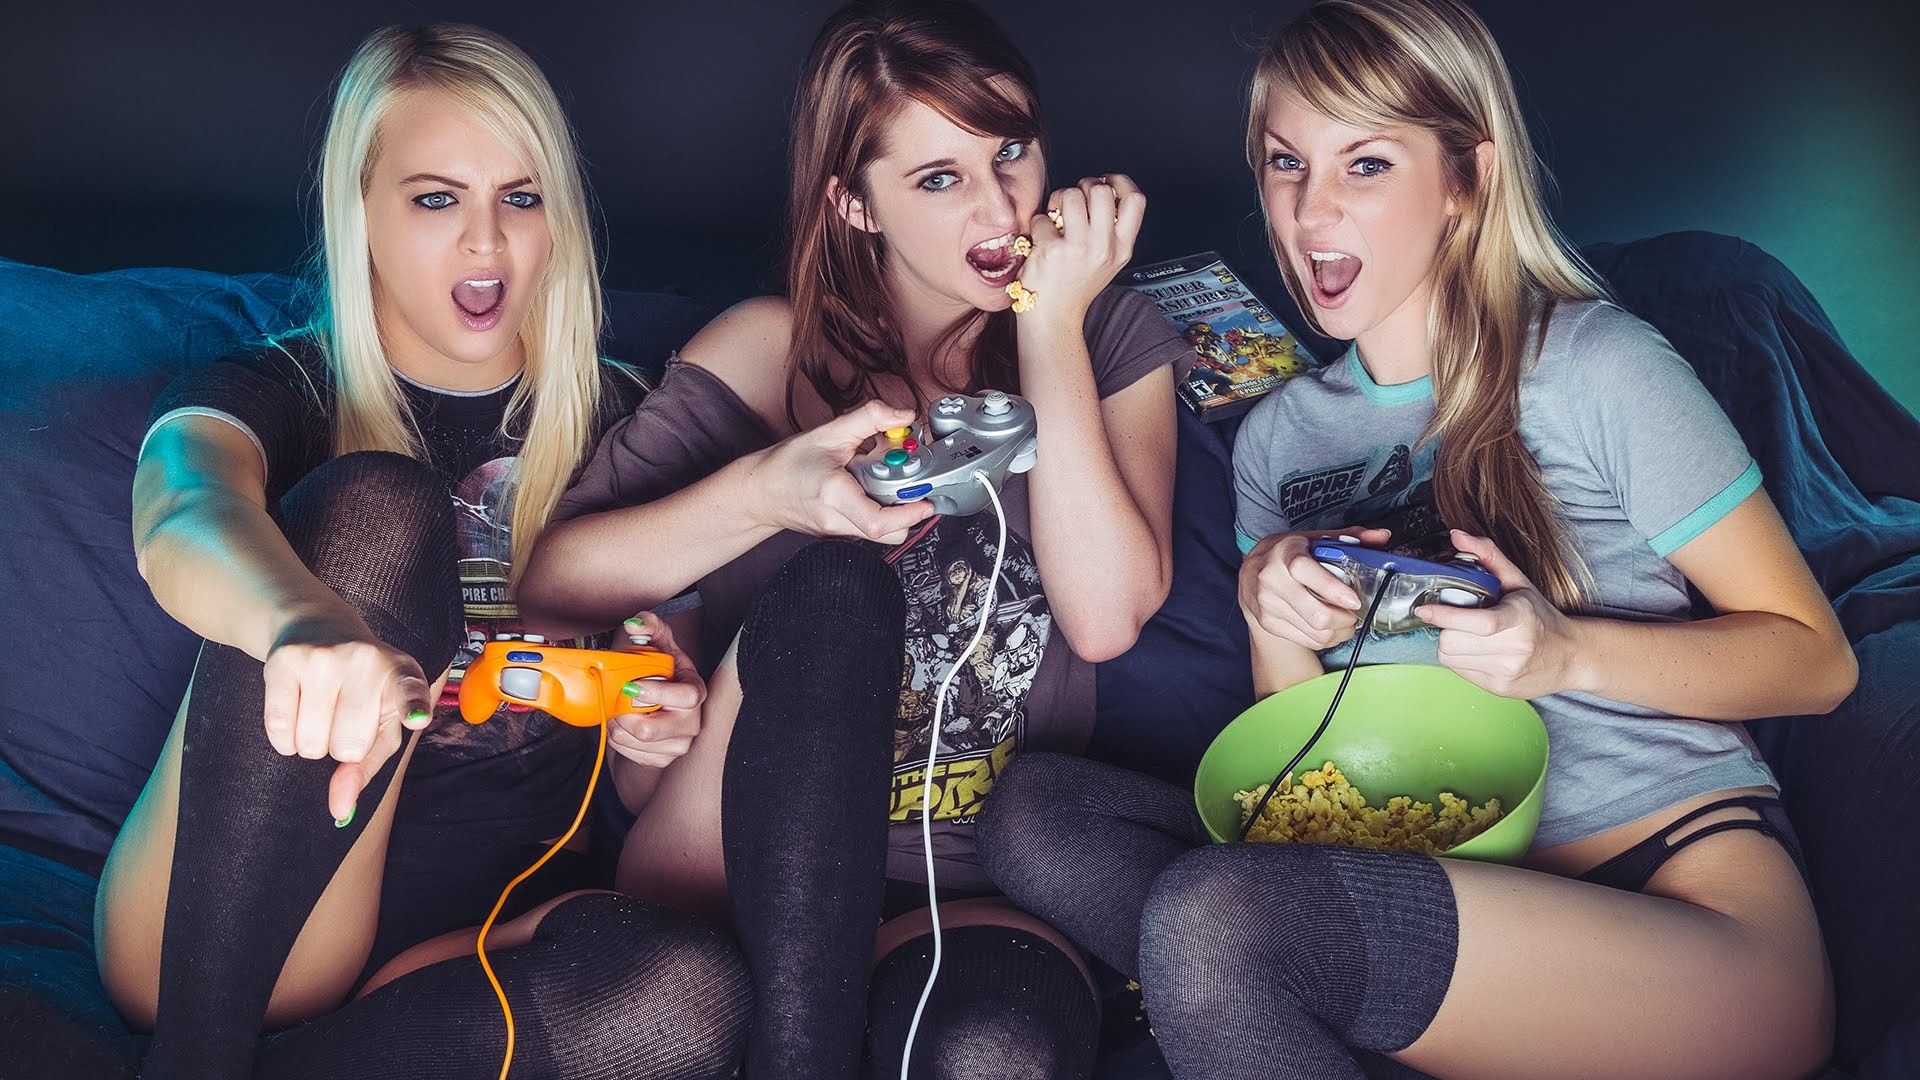 Three girls sitting on a couch with video game controllers.